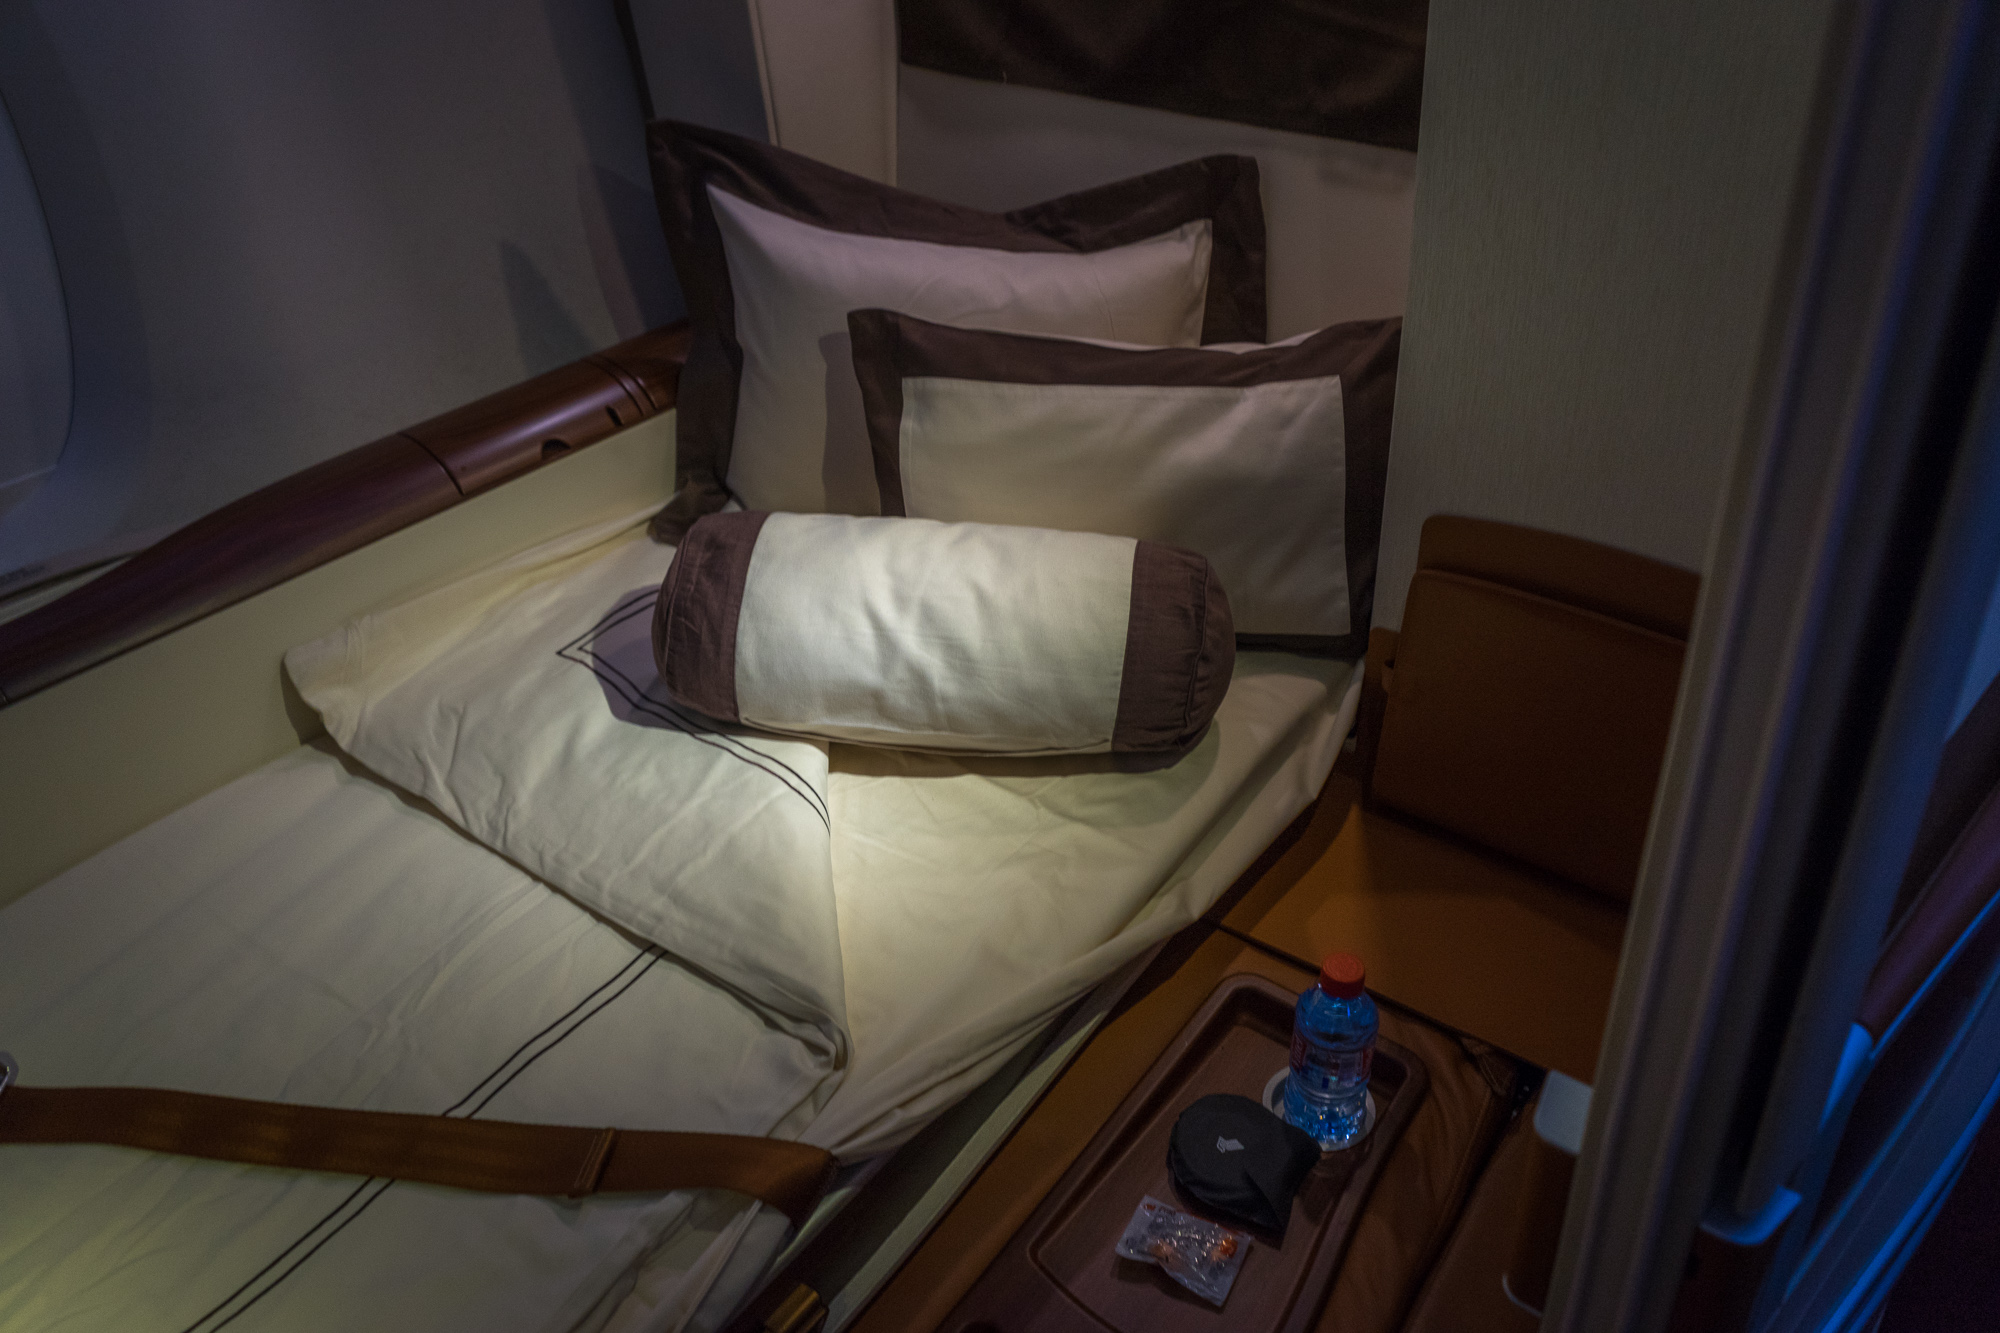 a bed with pillows and a bottle of water on a tray